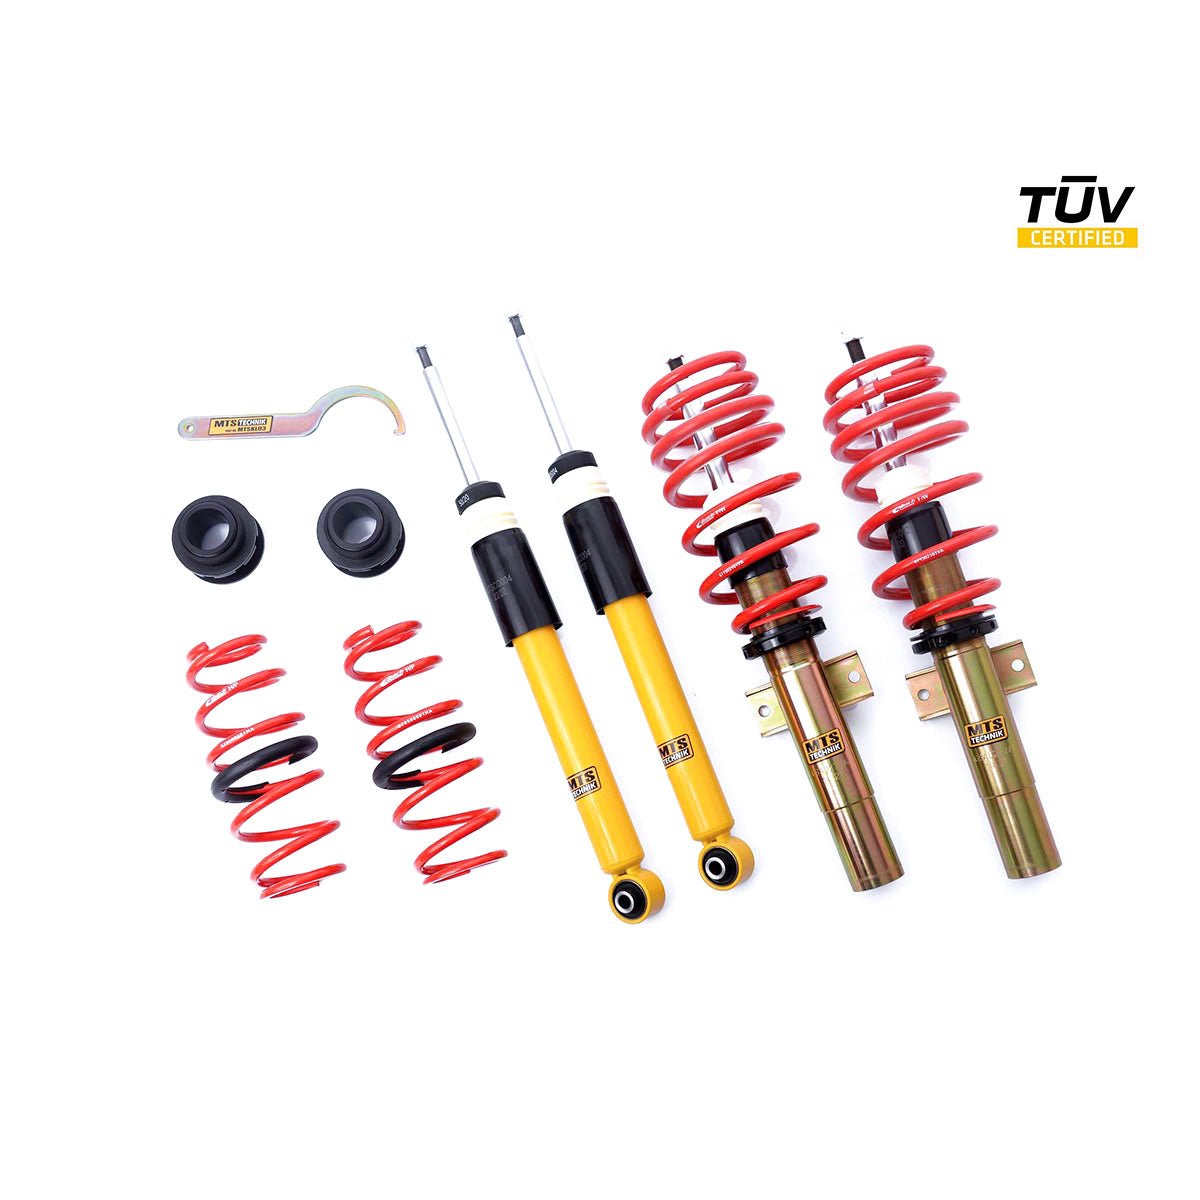 MTS TECHNIK coilover kit COMFORT Audi A1 GB Sportback (with TÜV) - PARTS33 GmbH